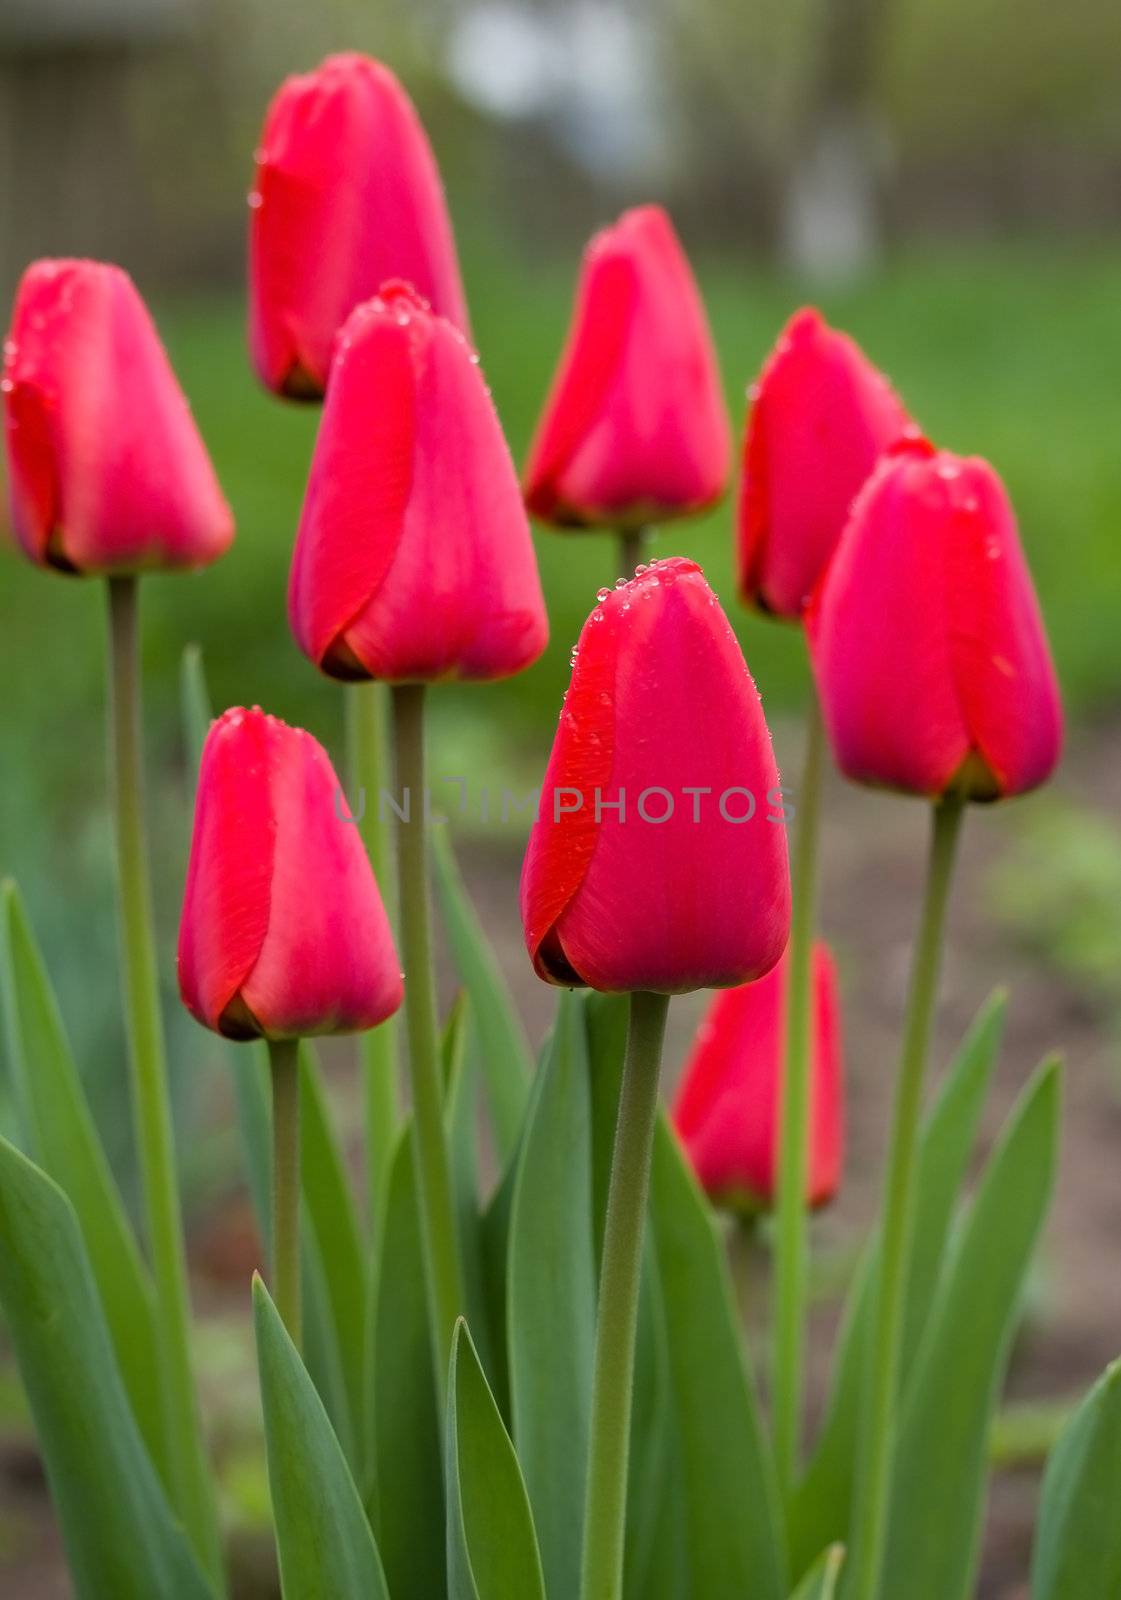 wet red tulips by Alekcey